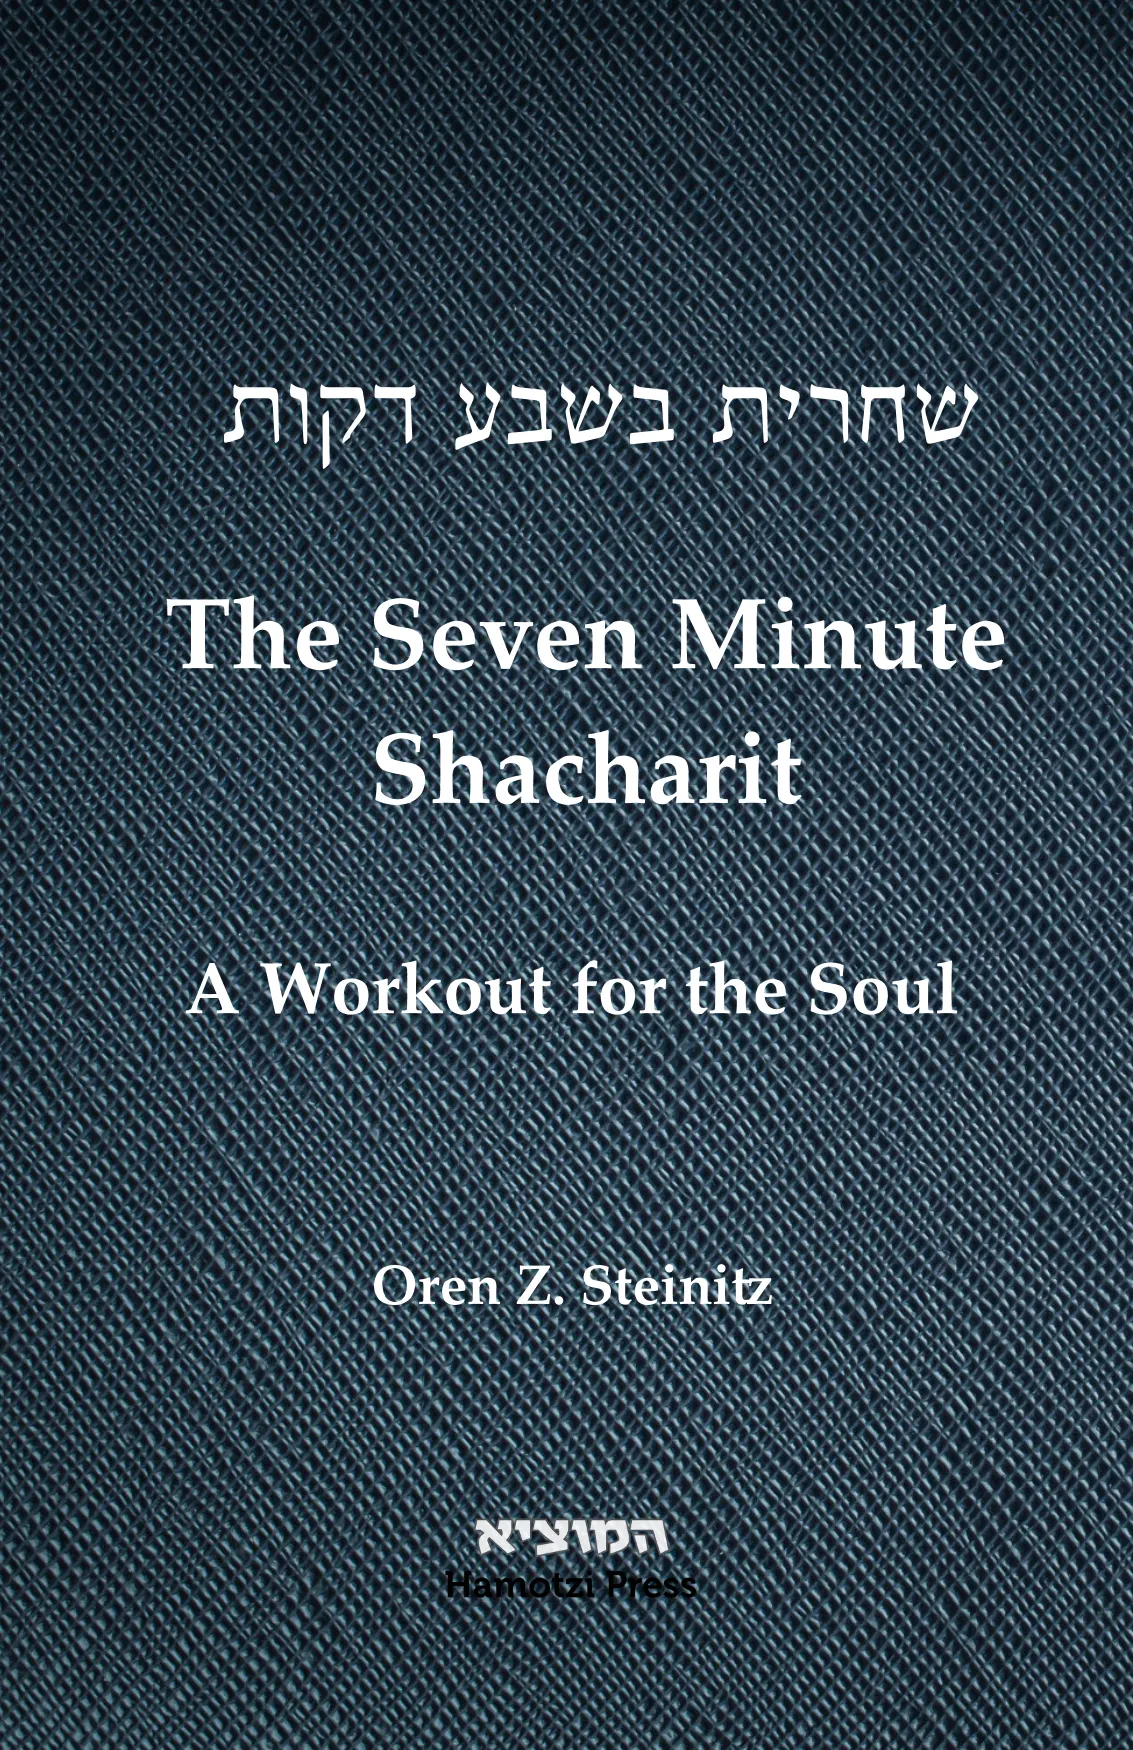 The Seven Minute Shacharit